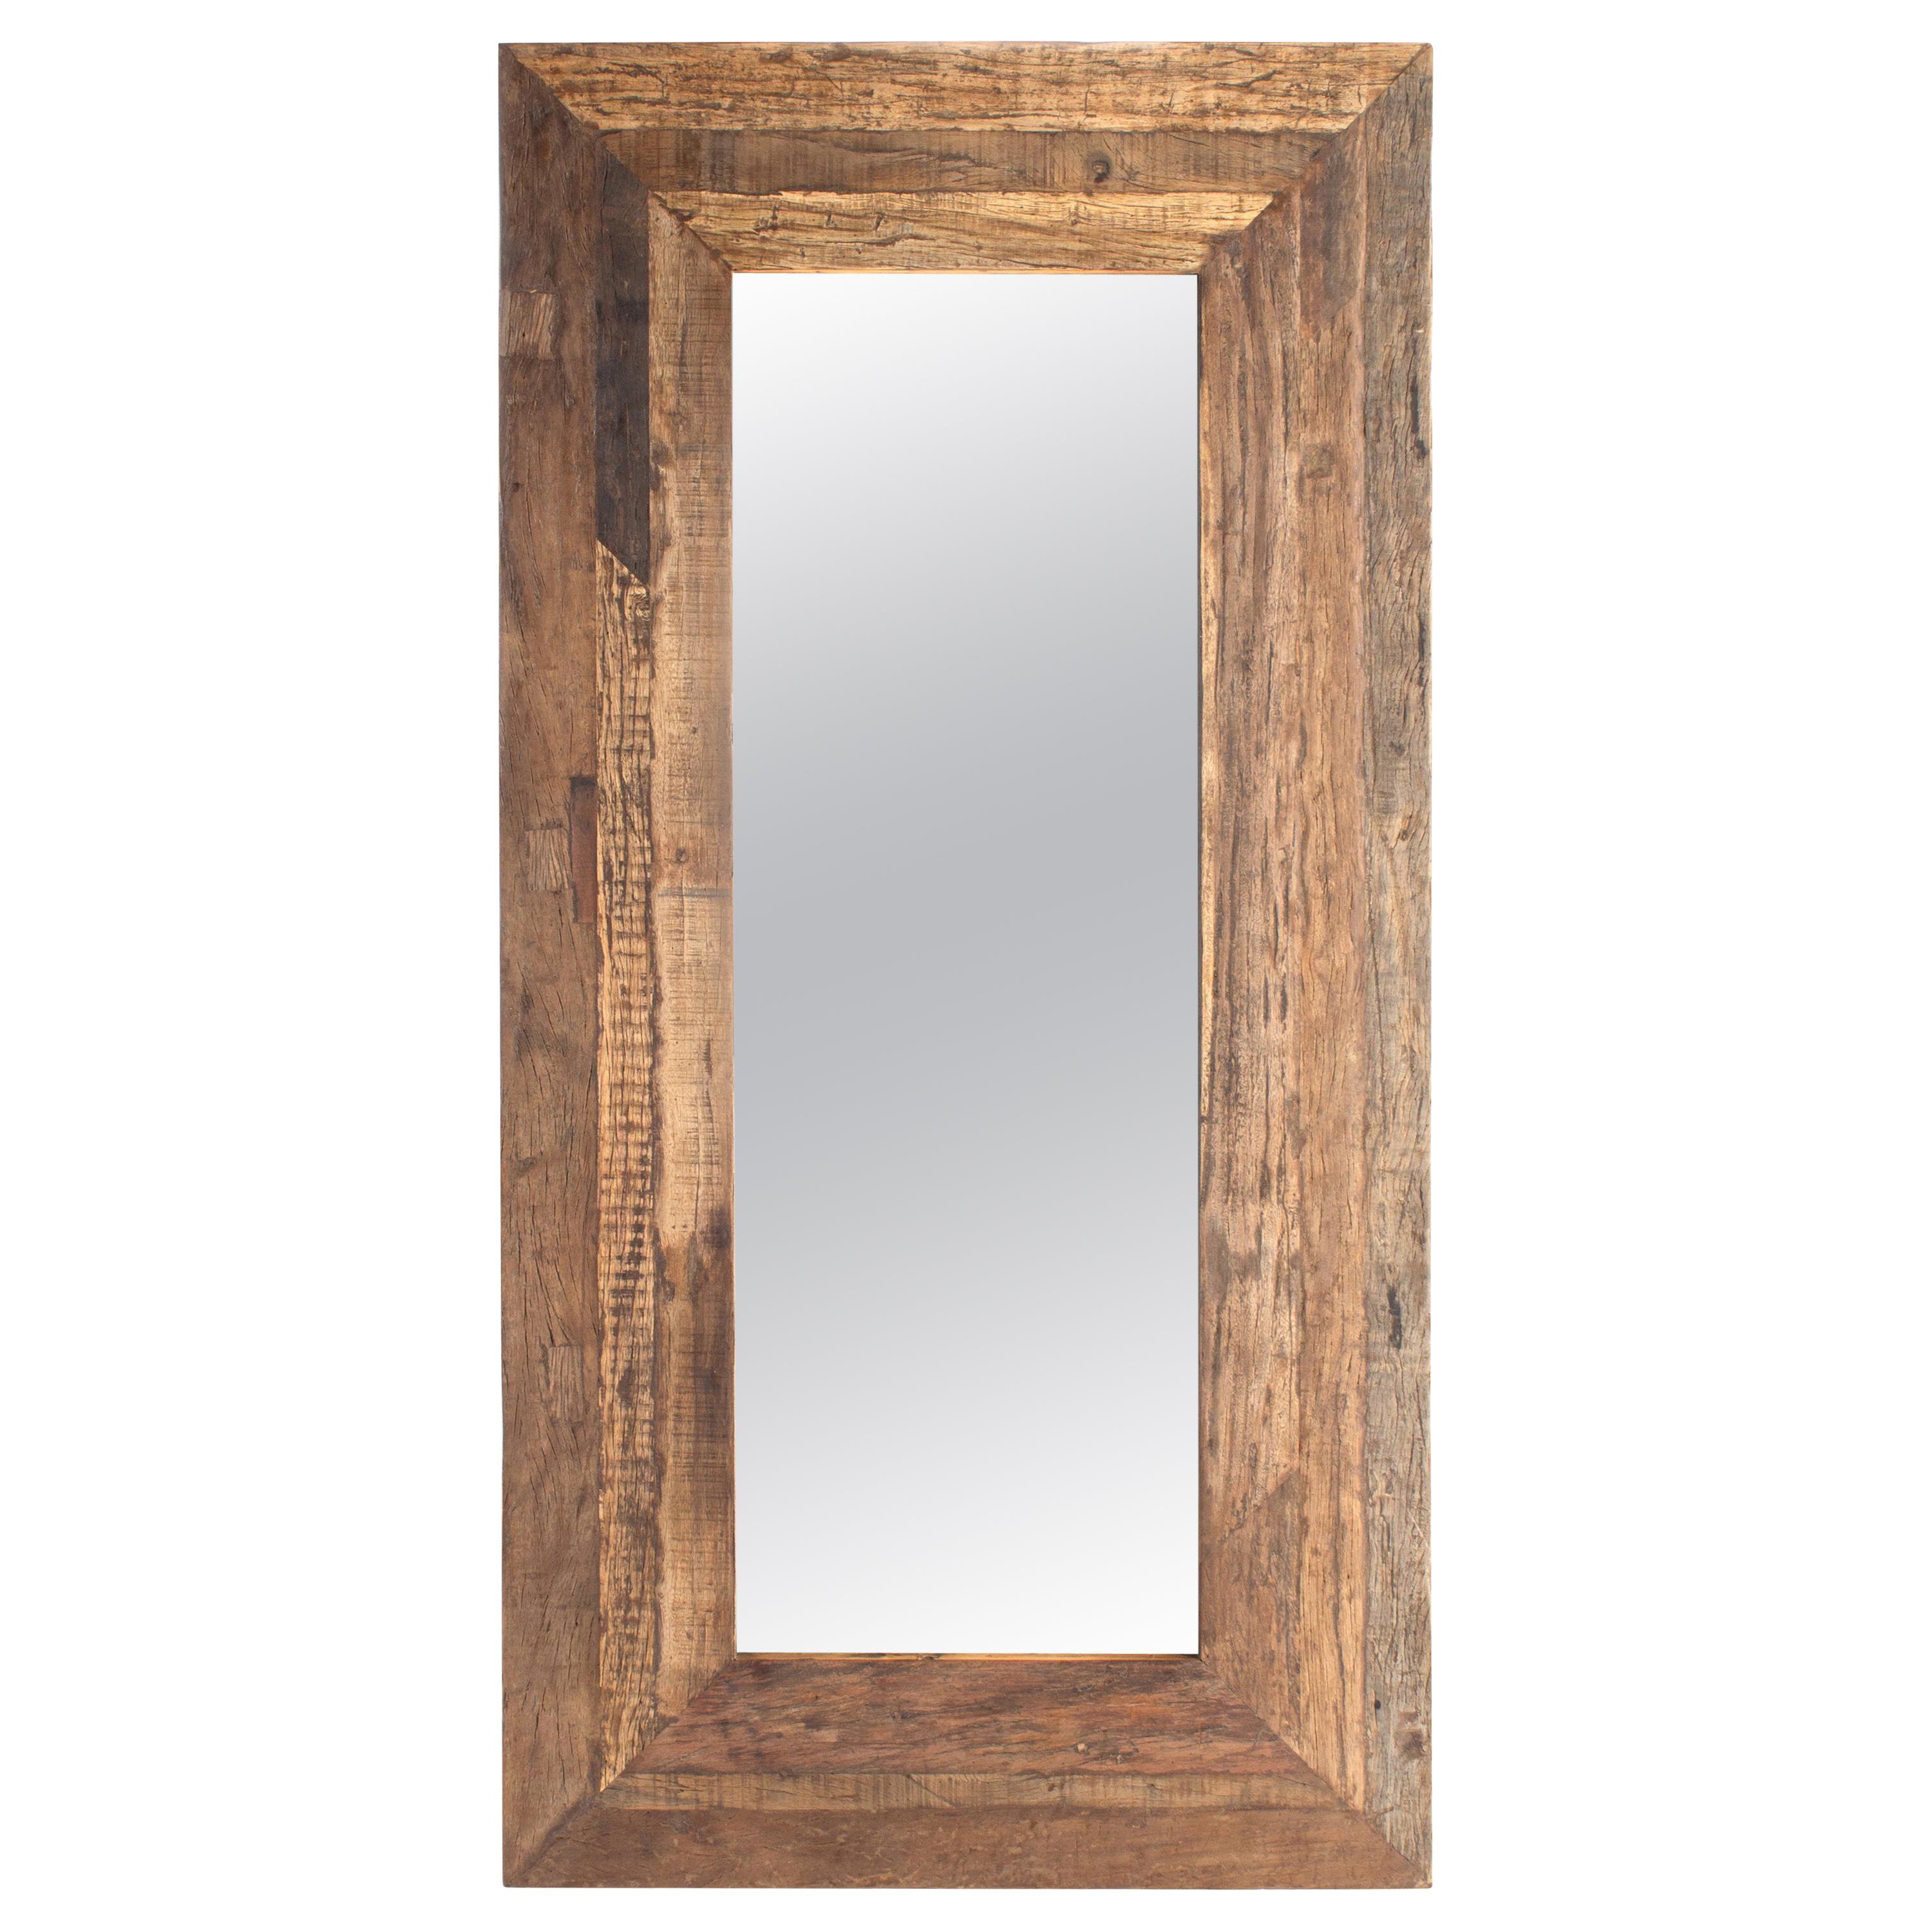 Mirror Frame Made from Reclaimed Elements For Sale